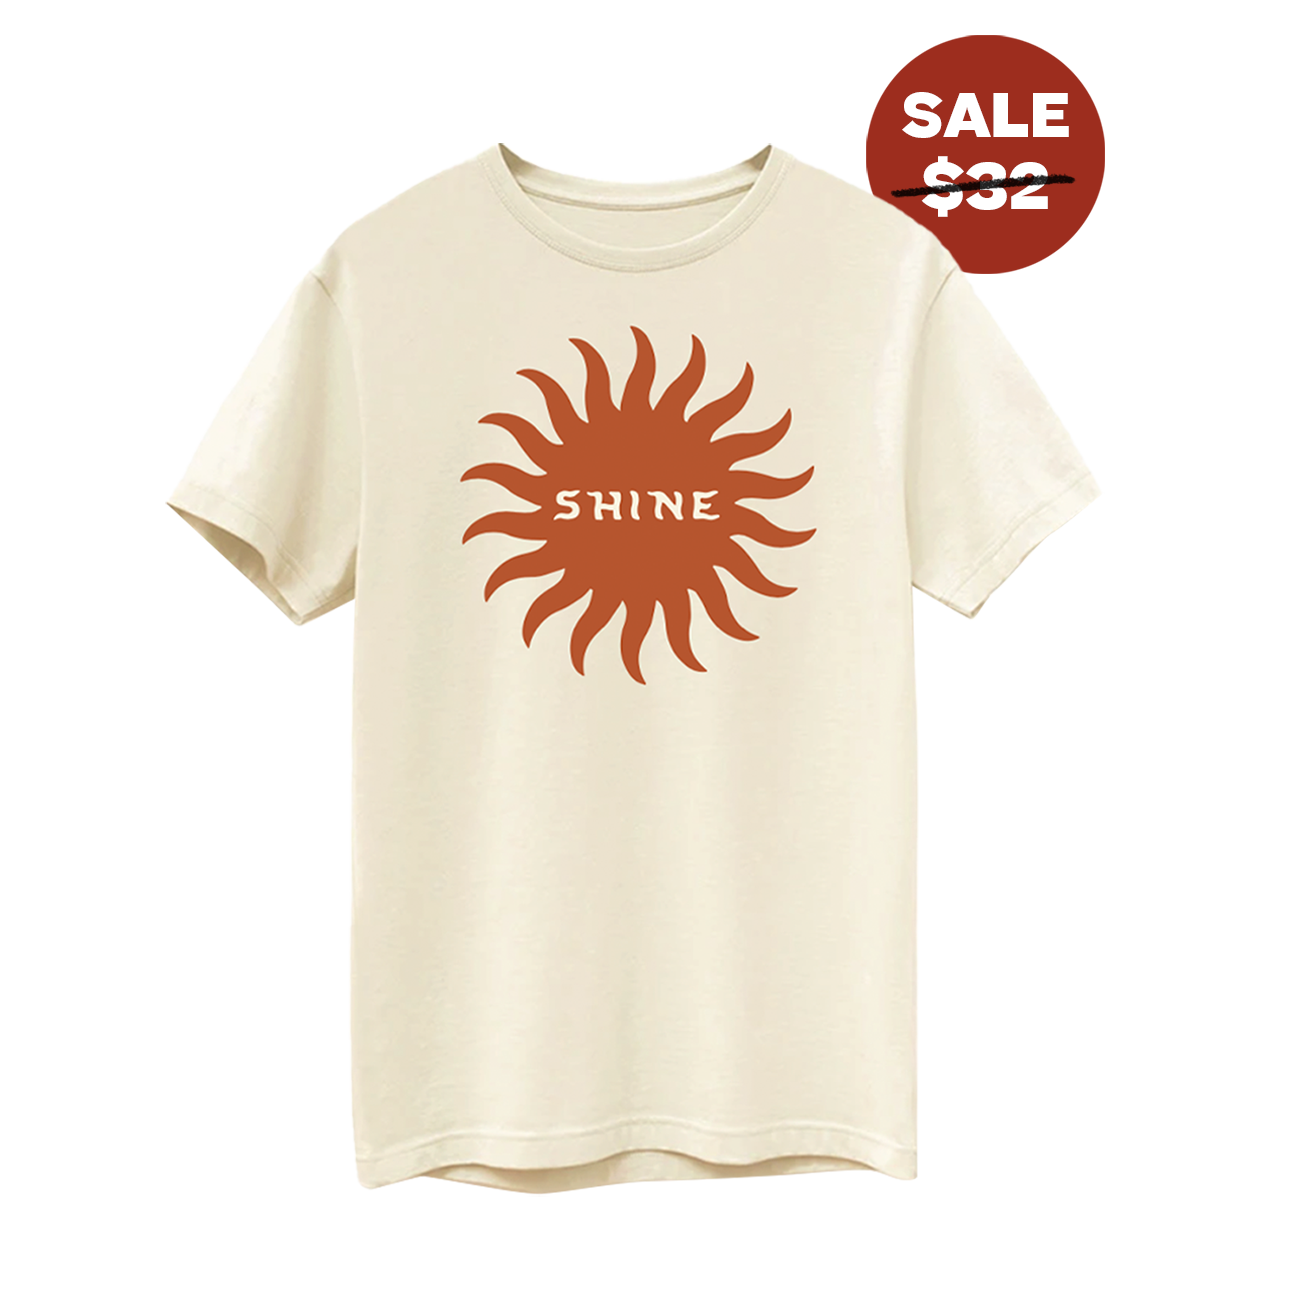 Front view of short sleeve cream colored shirt with a dark orange shape of a sun with the word "shine" on the inside of the shape.